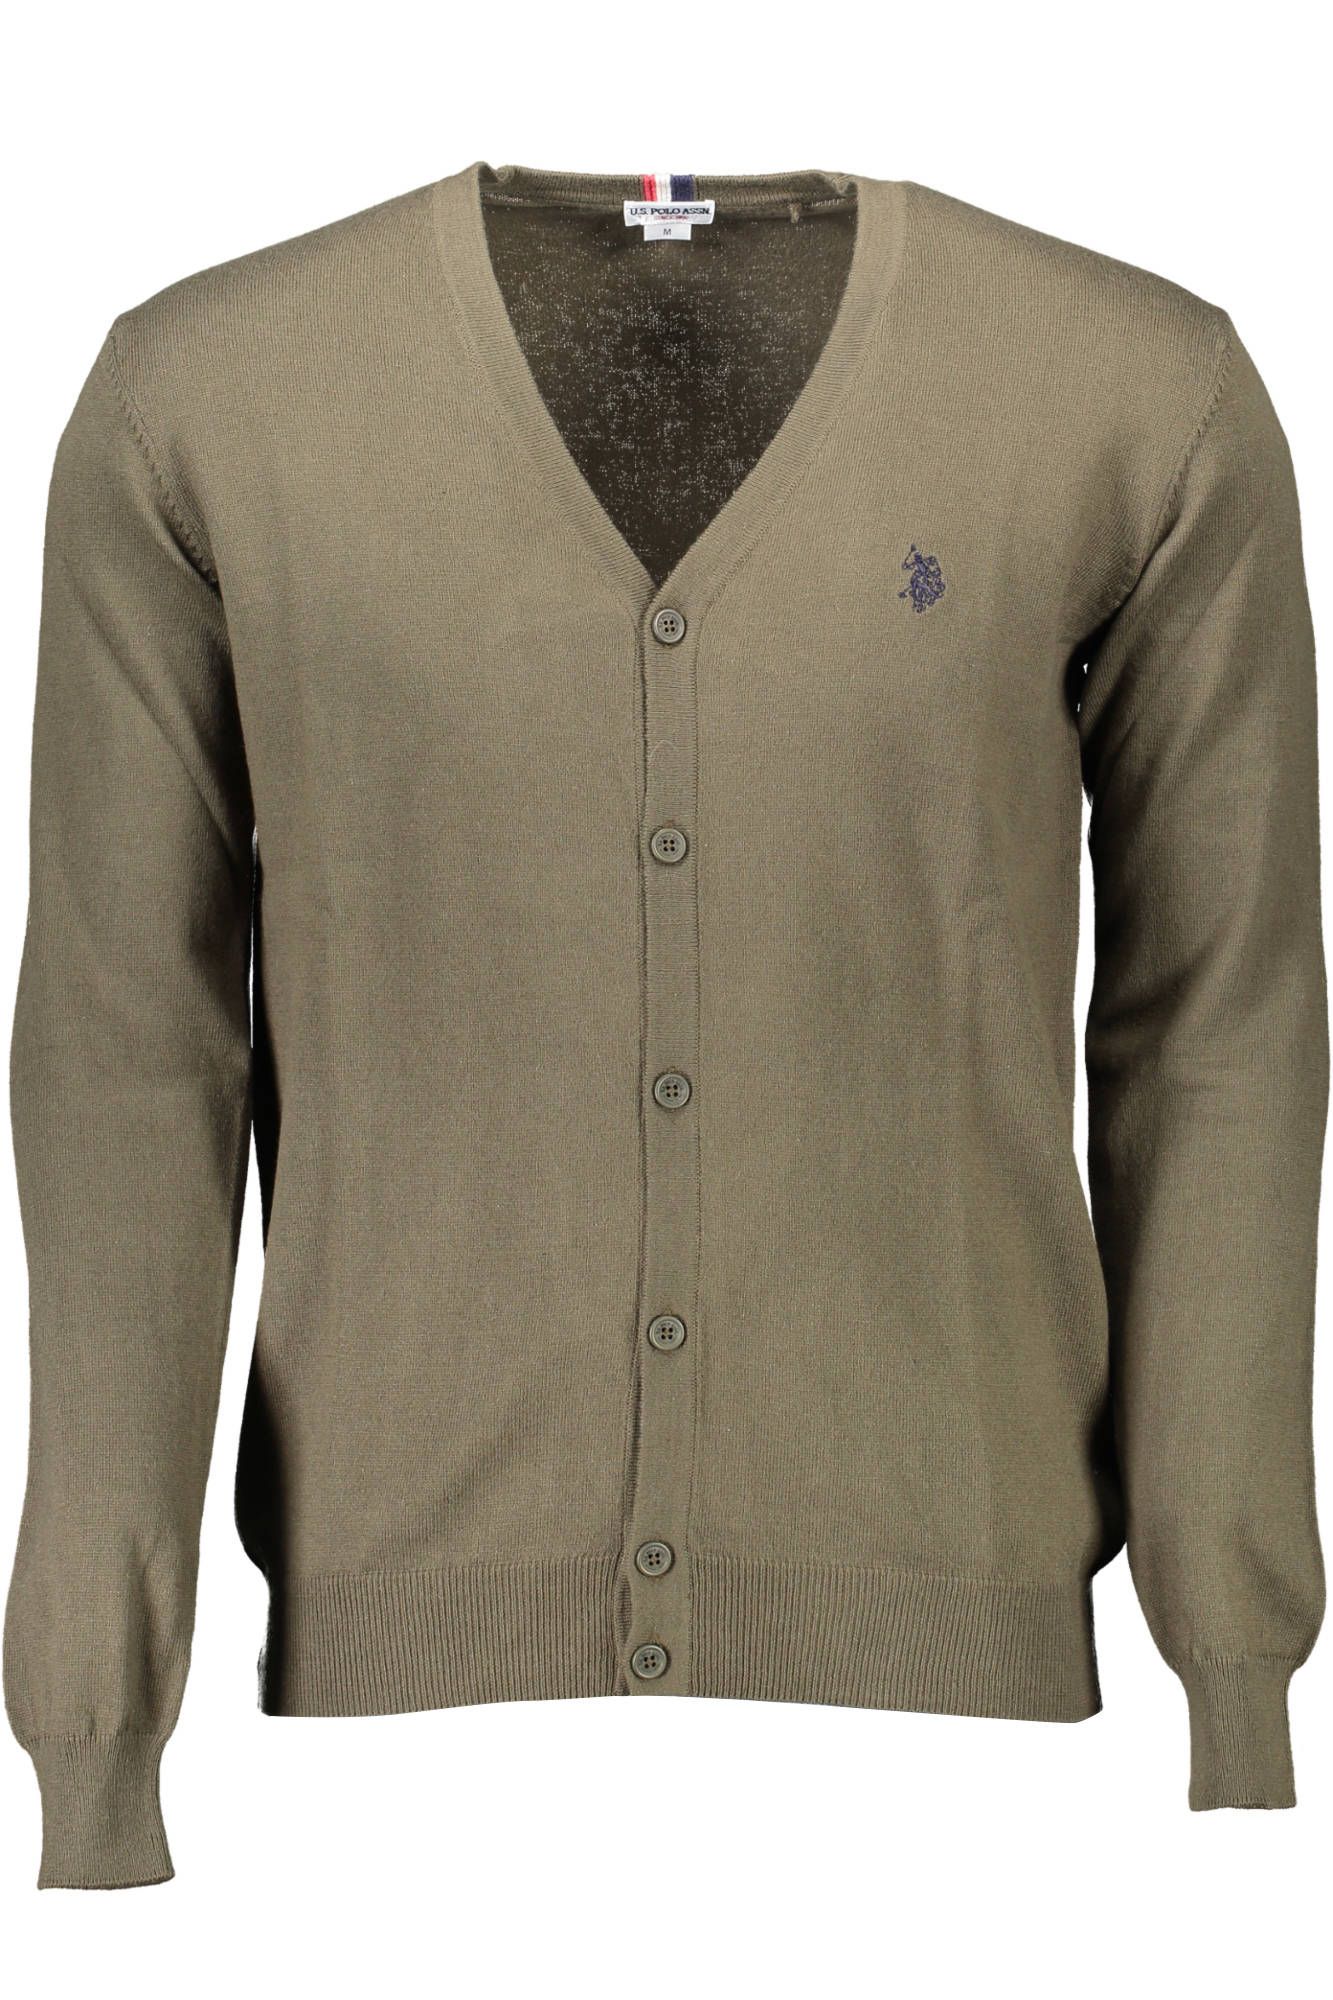 U.S. POLO ASSN. V-Neck Cotton Cashmere Cardigan in Green